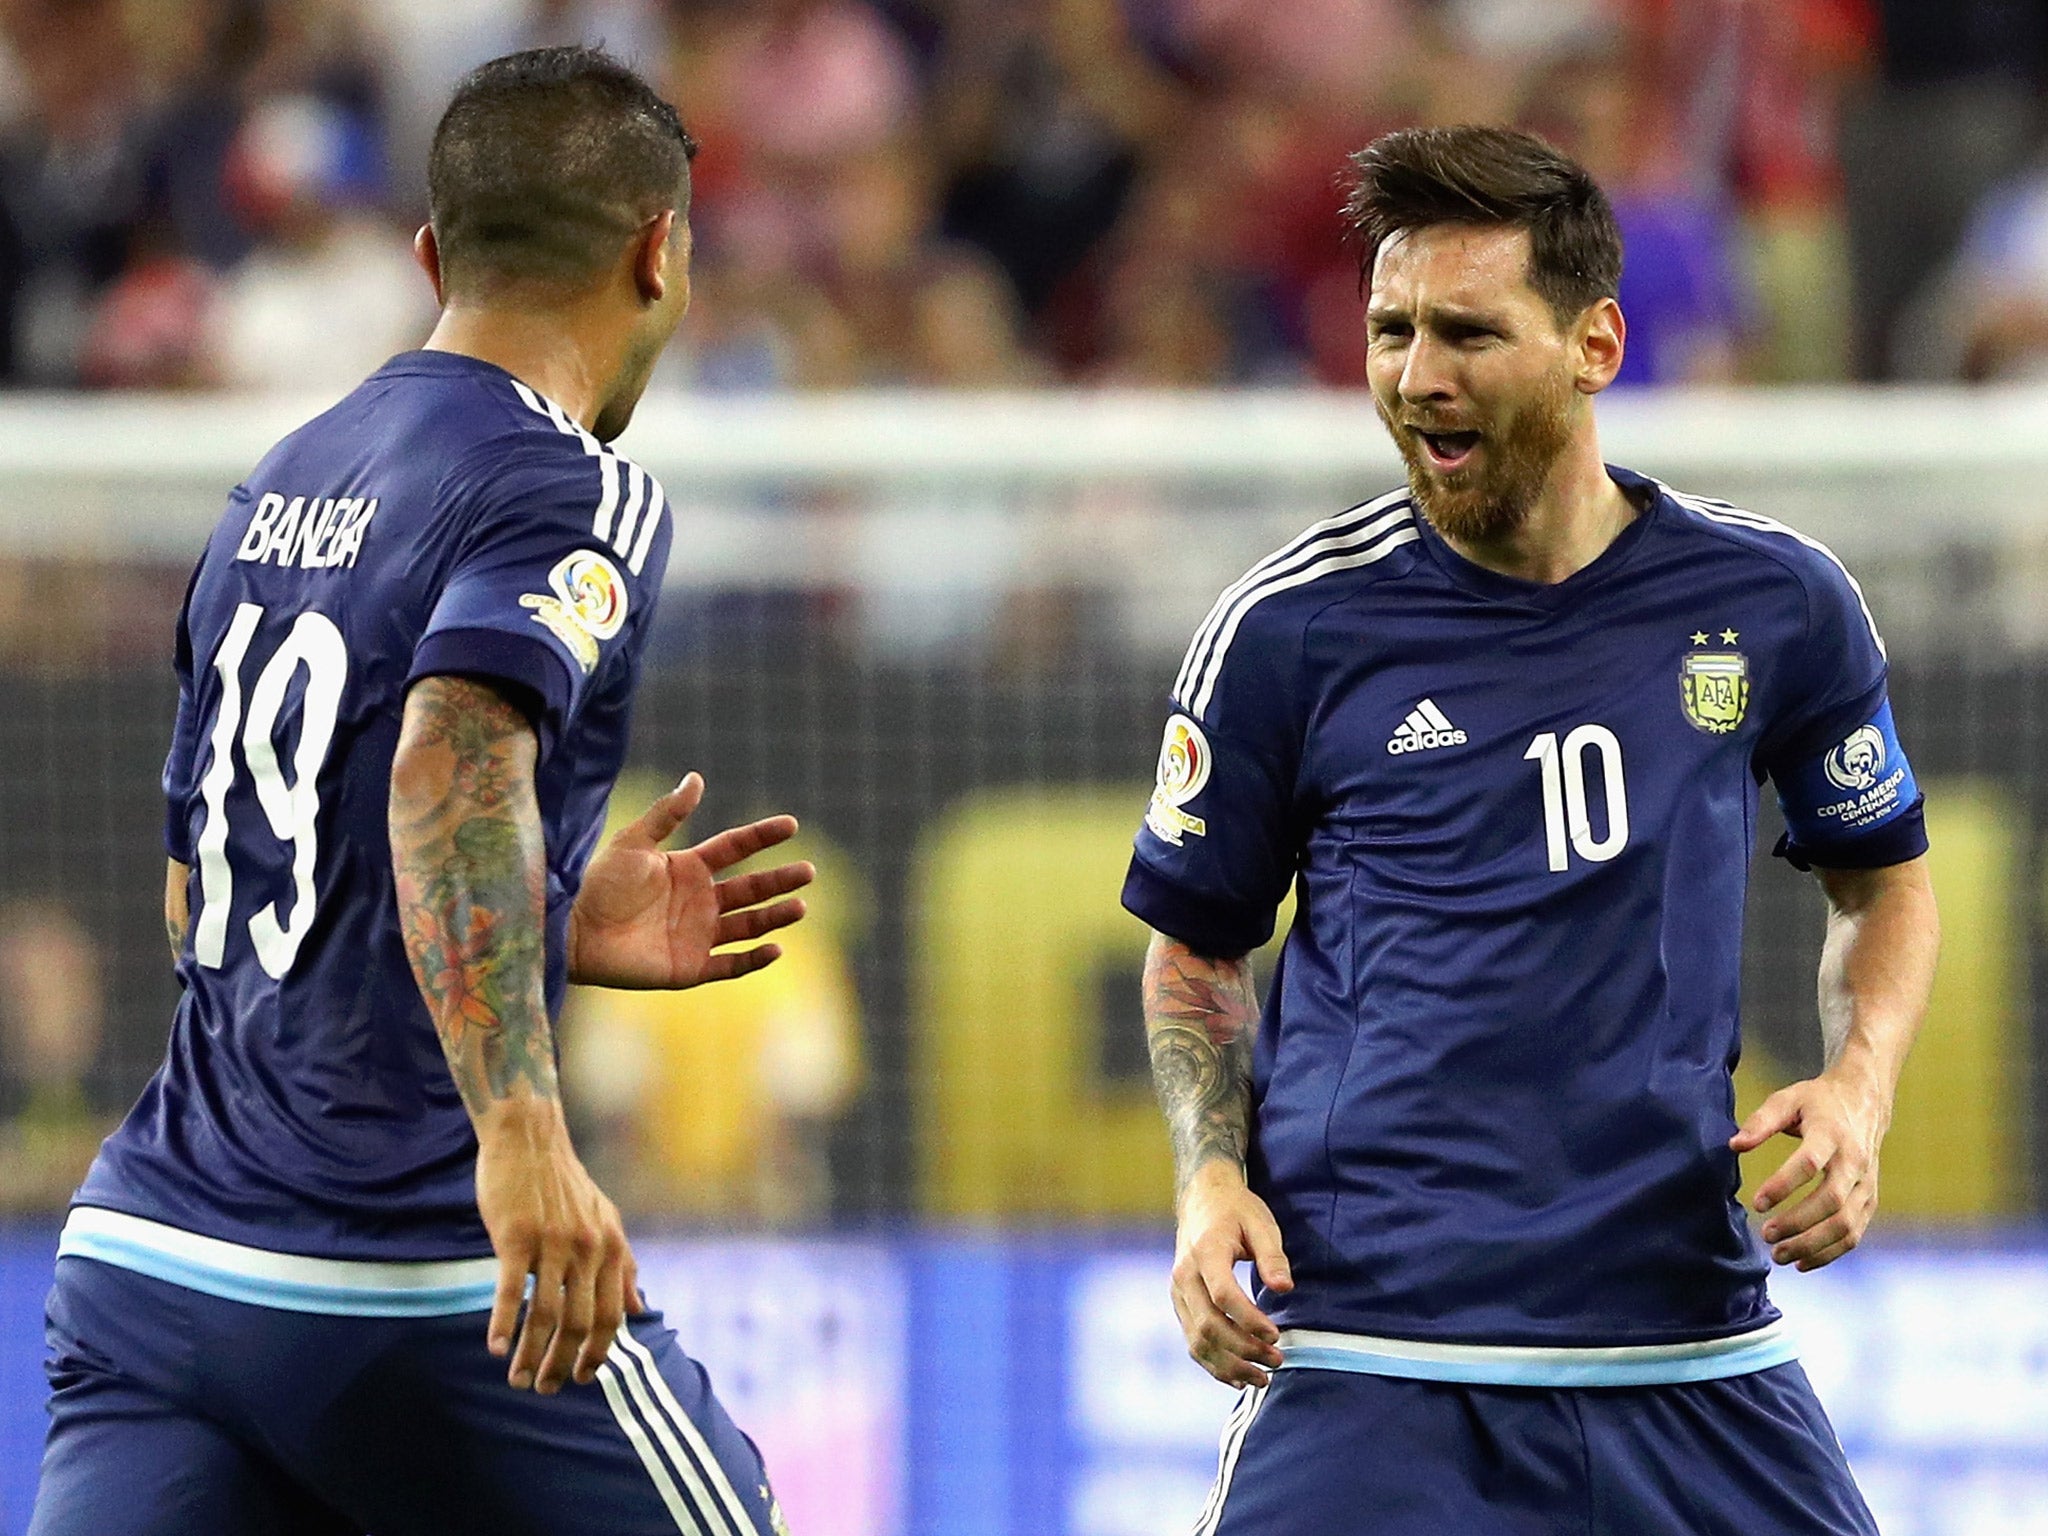 Lionel Messi celebrates after scoring a free-kick for Argentina